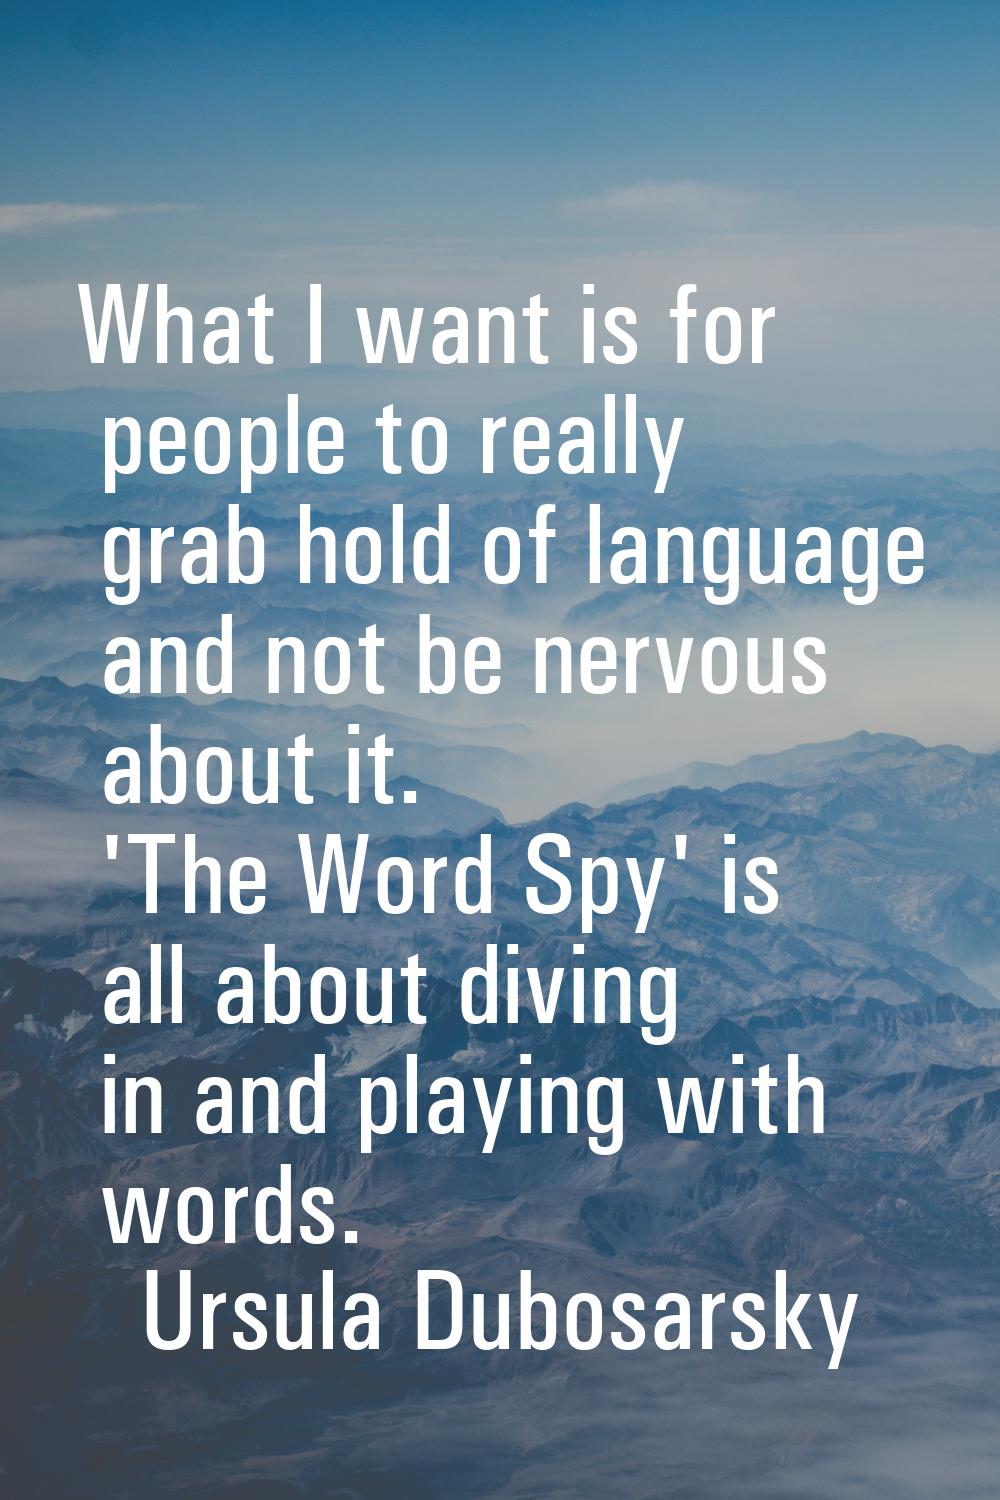 What I want is for people to really grab hold of language and not be nervous about it. 'The Word Sp